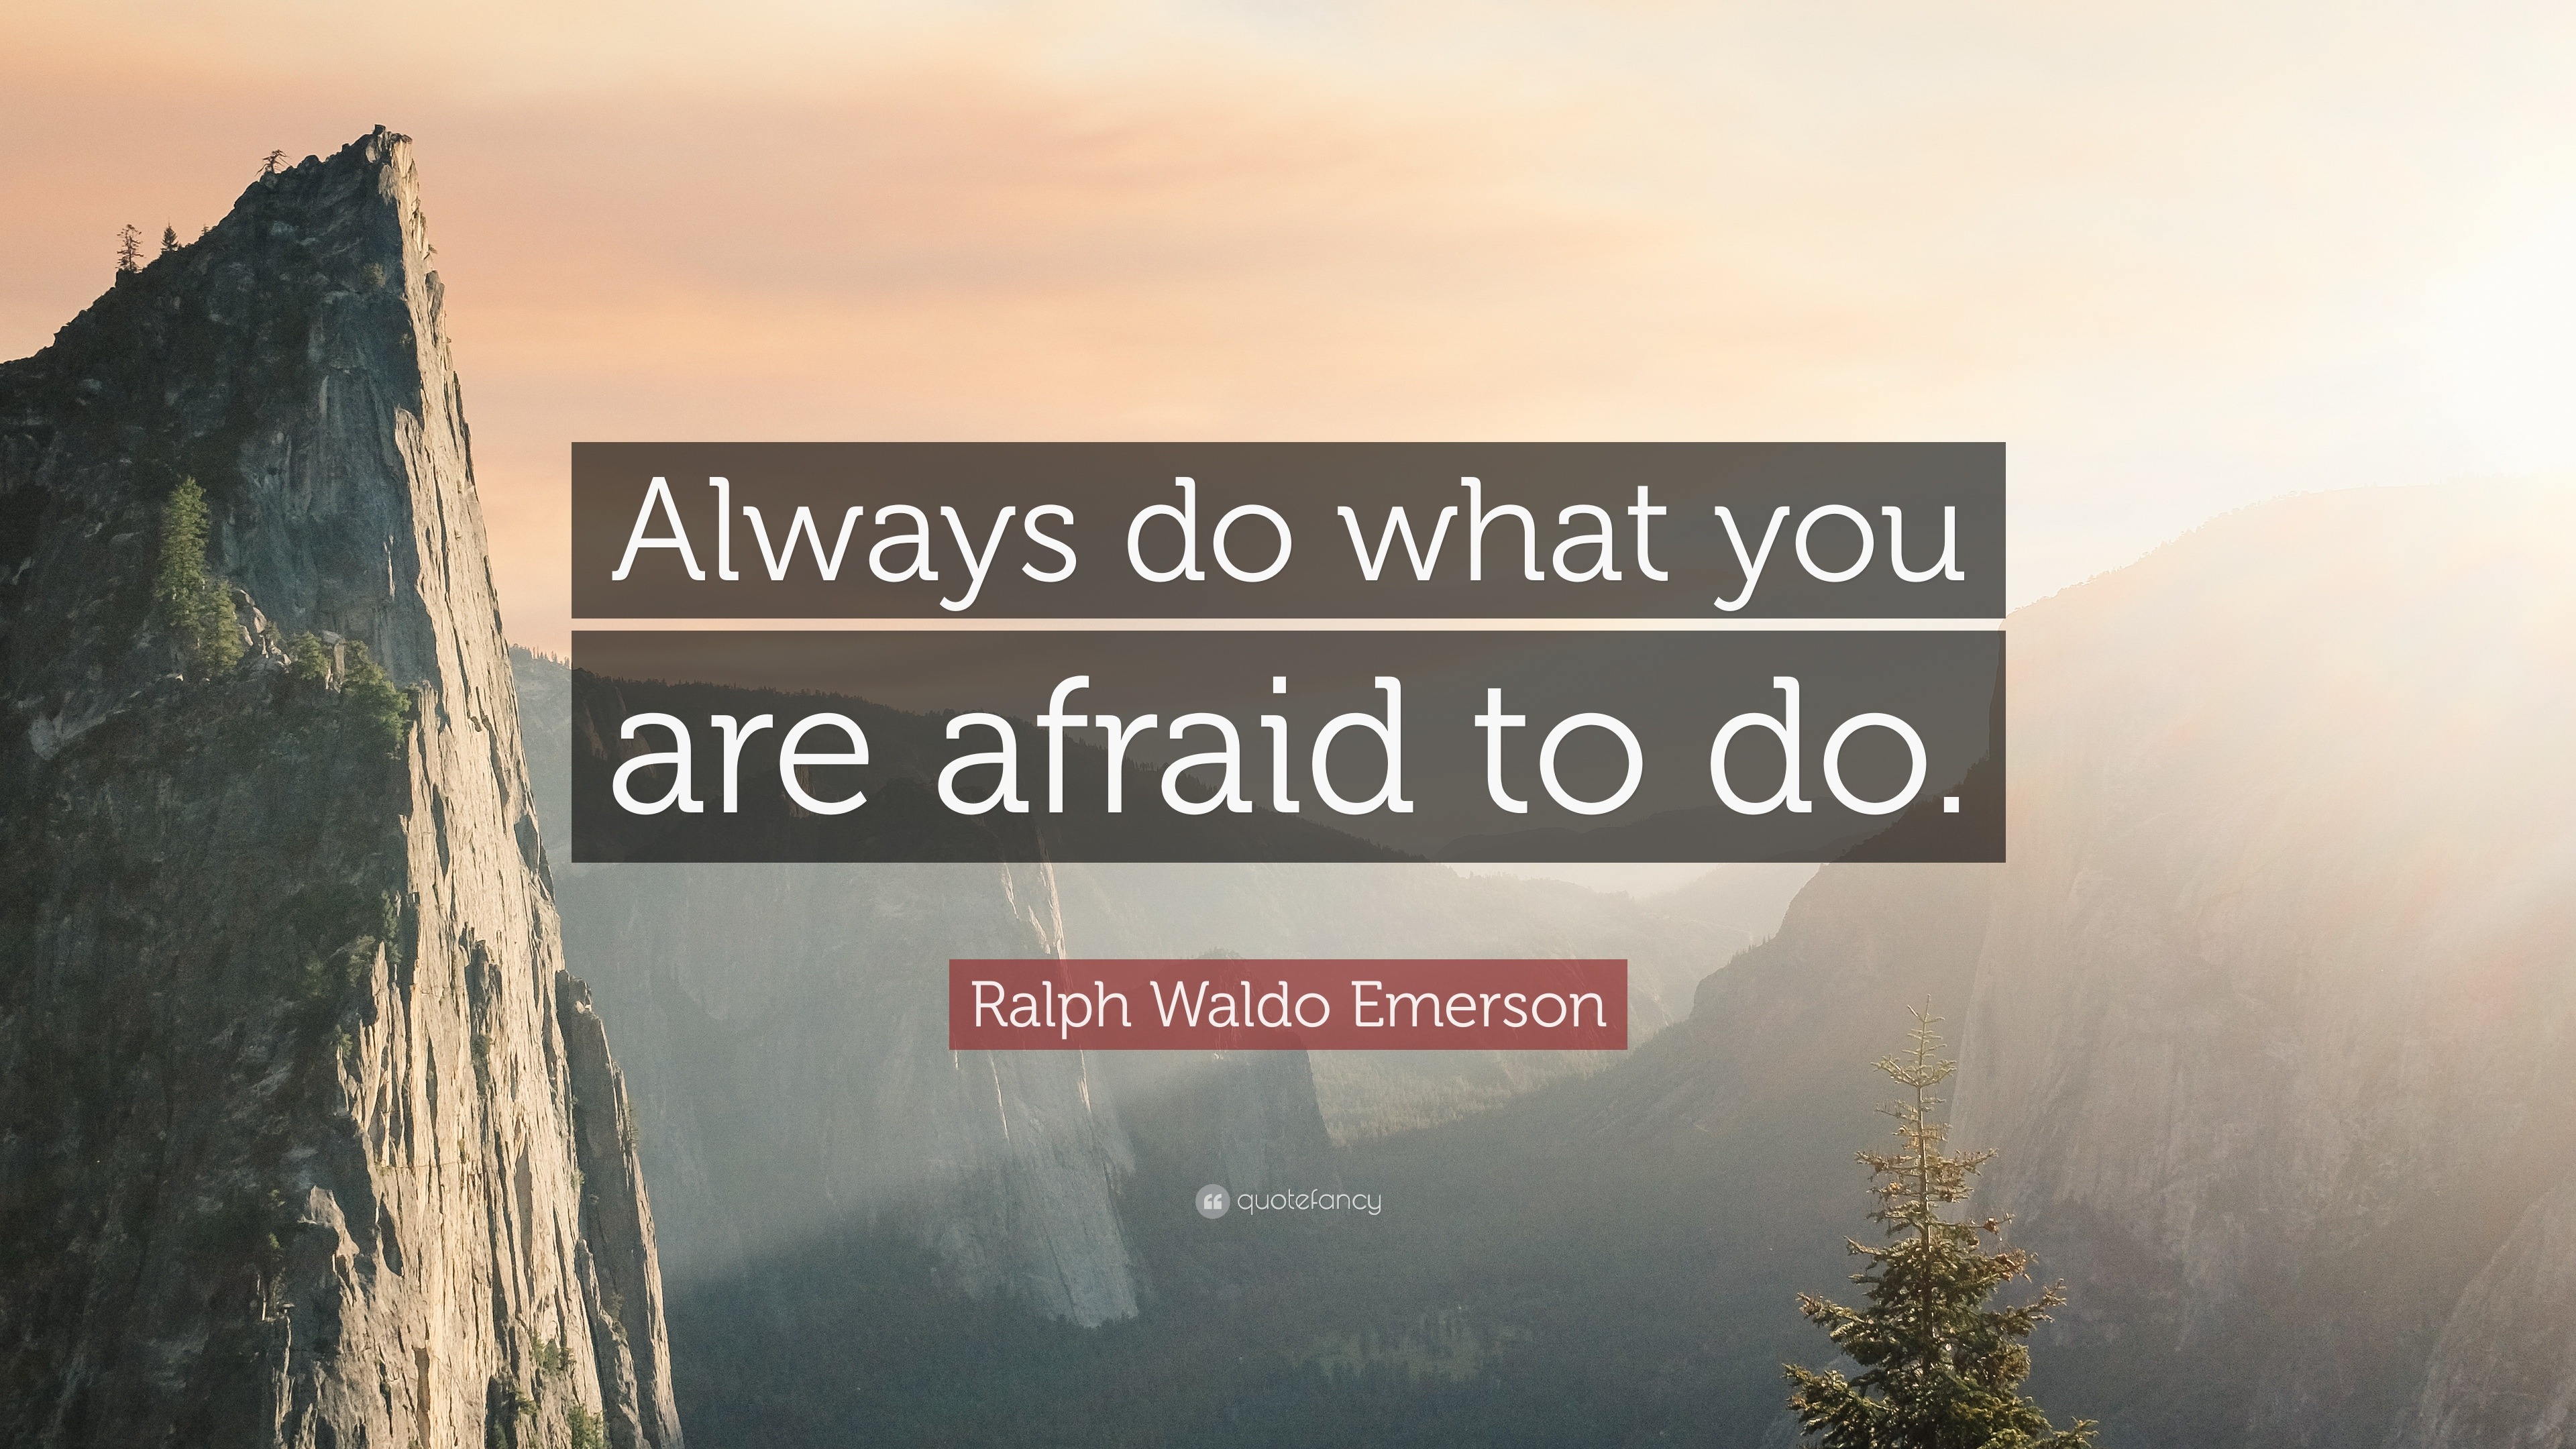 Ralph Waldo Emerson Quotes (28 wallpapers) - Quotefancy